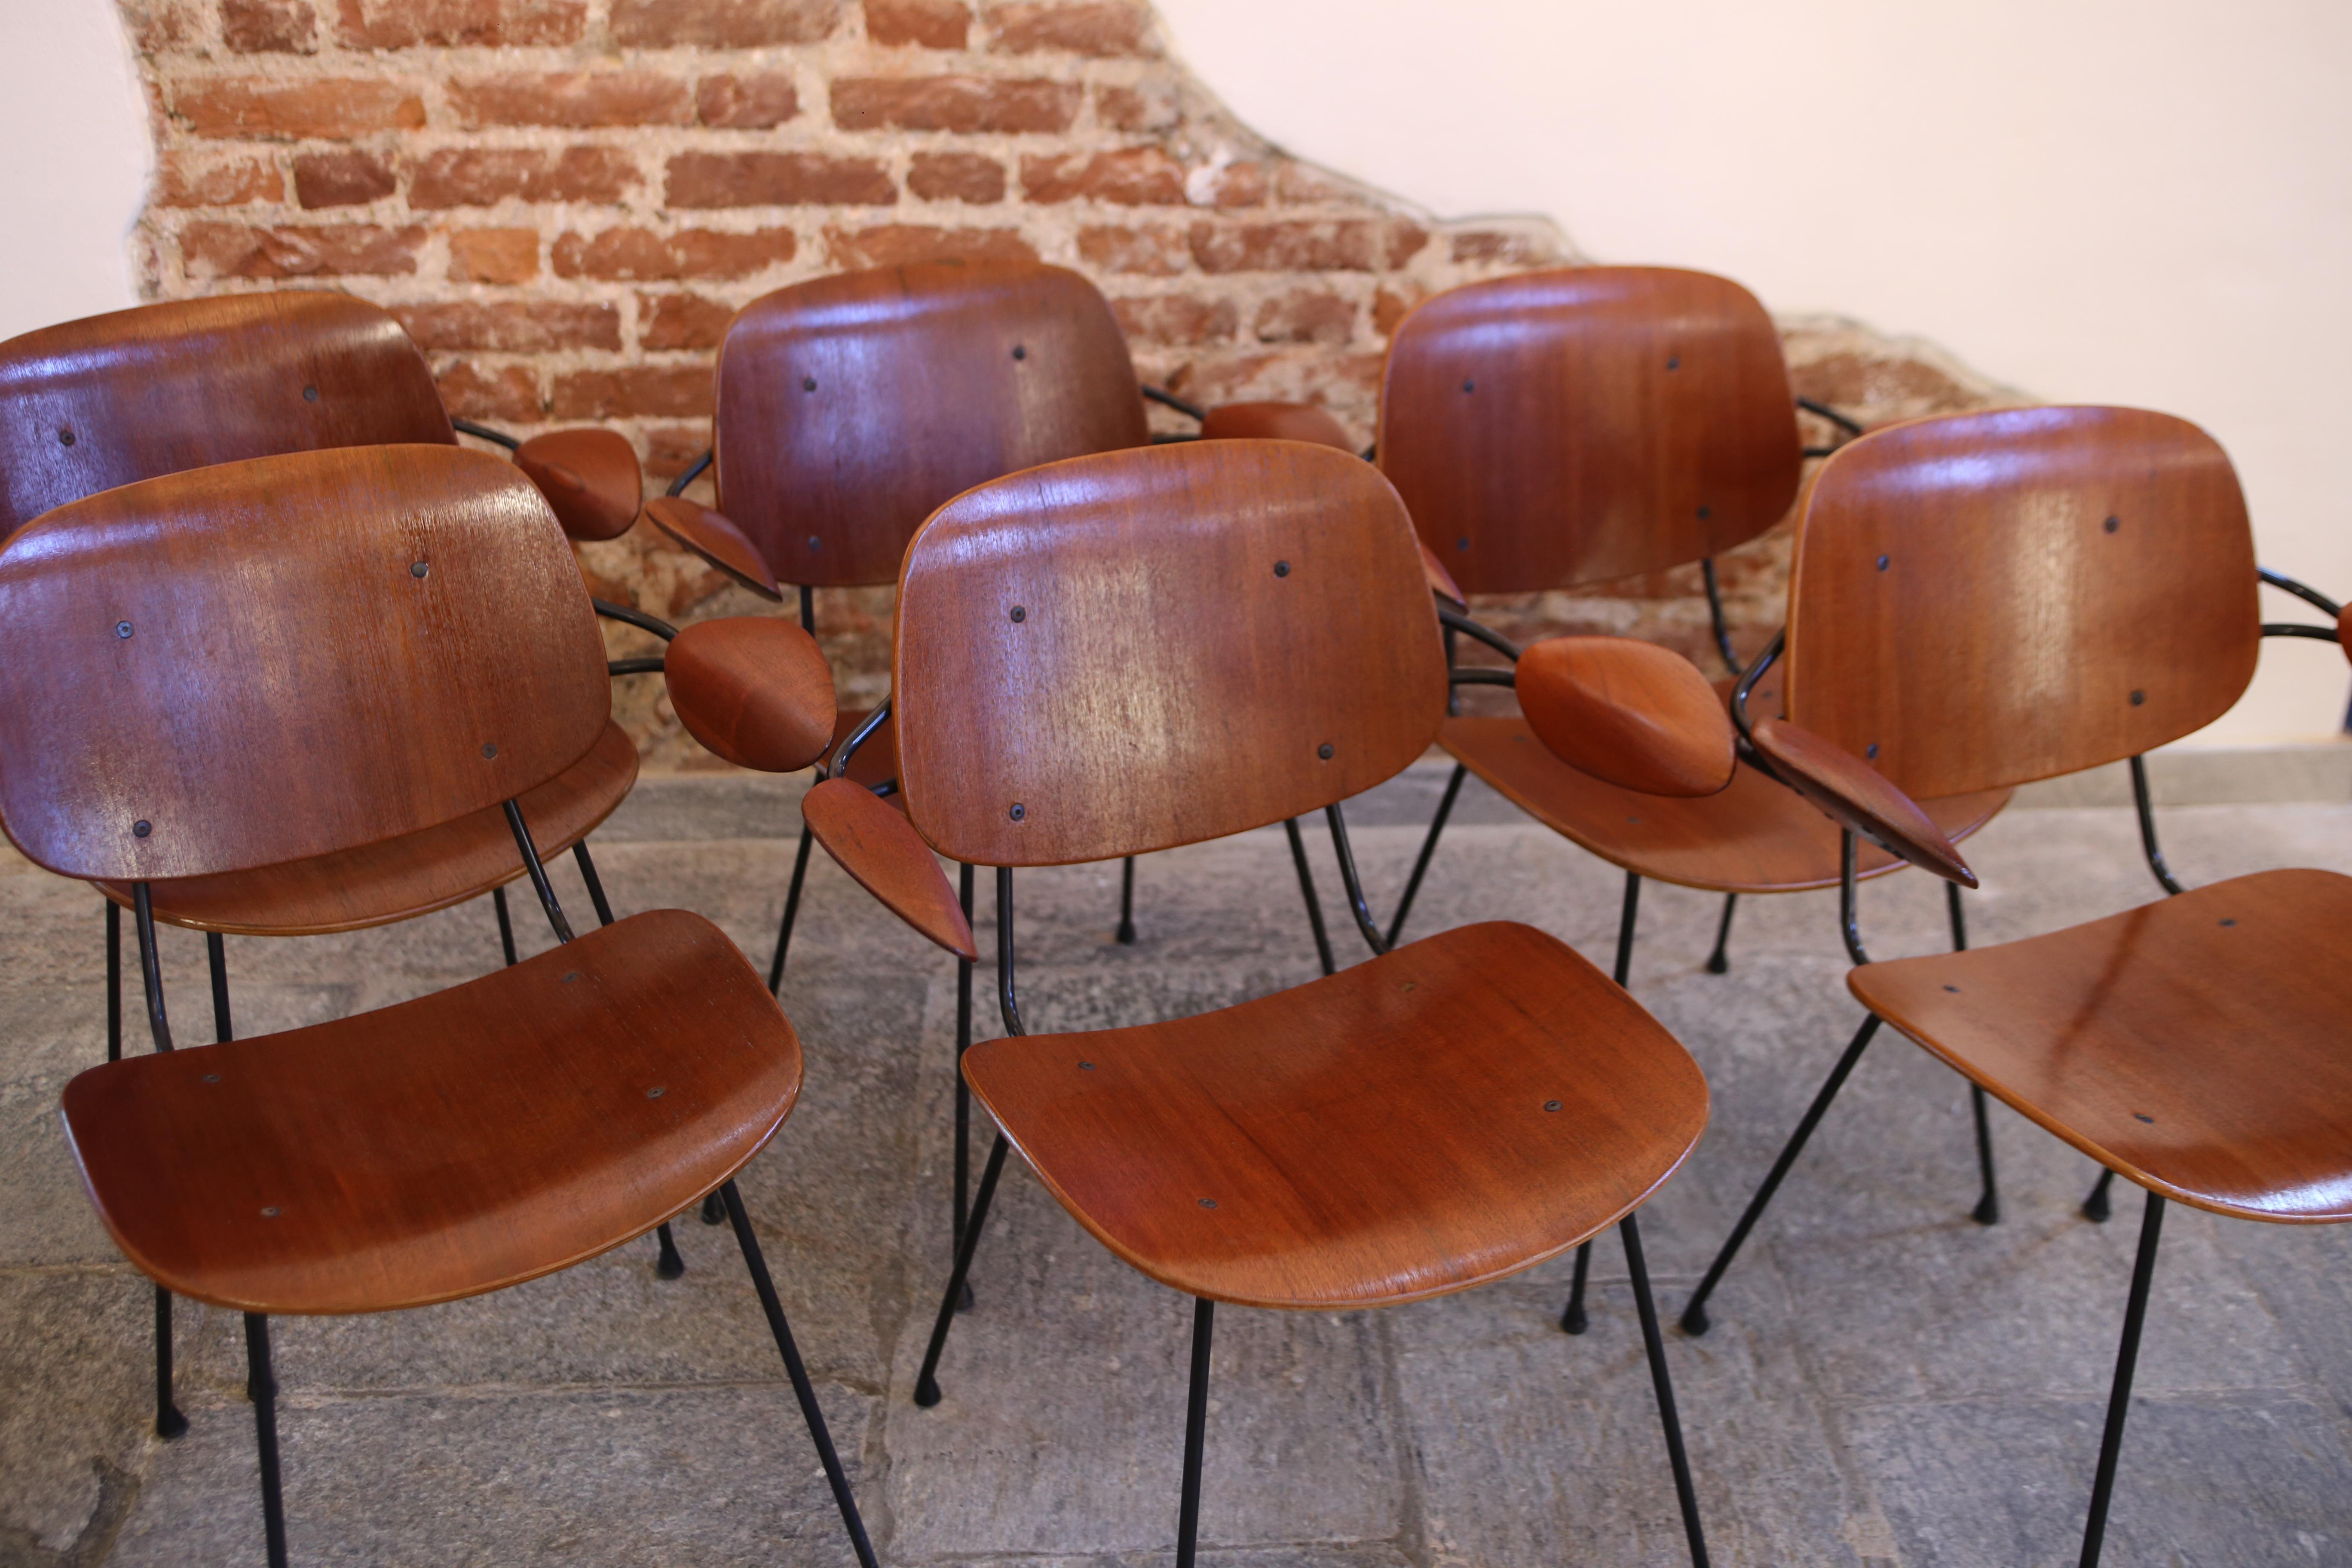 Rare set of 6 armchairs by Carlo Hauner for Forma Italia from the 1950s.
these armchairs in curved wood veneered with mahogany, produced by the Brescia-based company Forma.
The armrests are made of carved mahogany wood which give these armchairs a